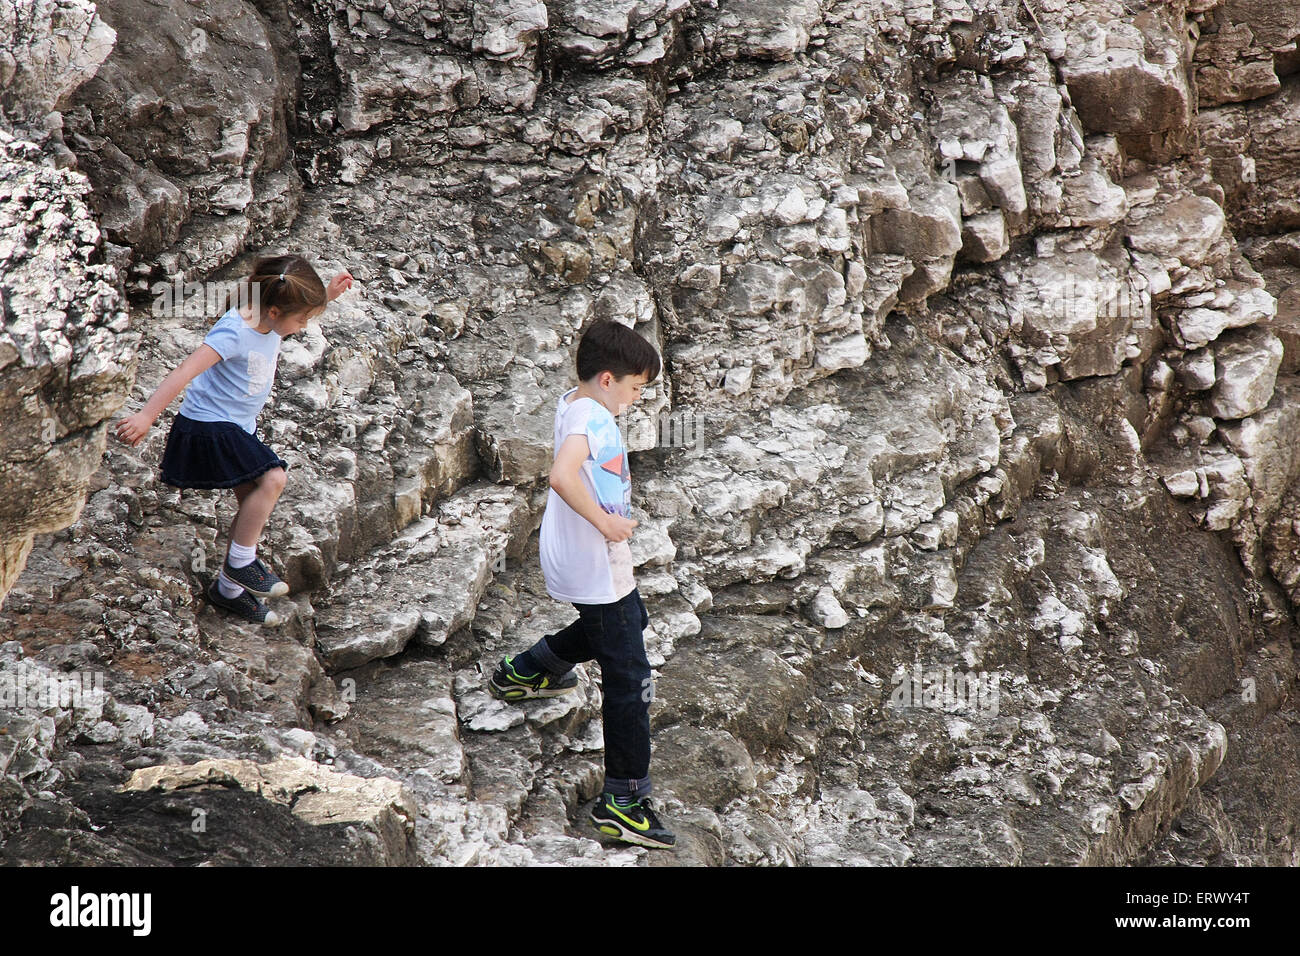 Young people on cliff face path in dangerous conditions. Stock Photo